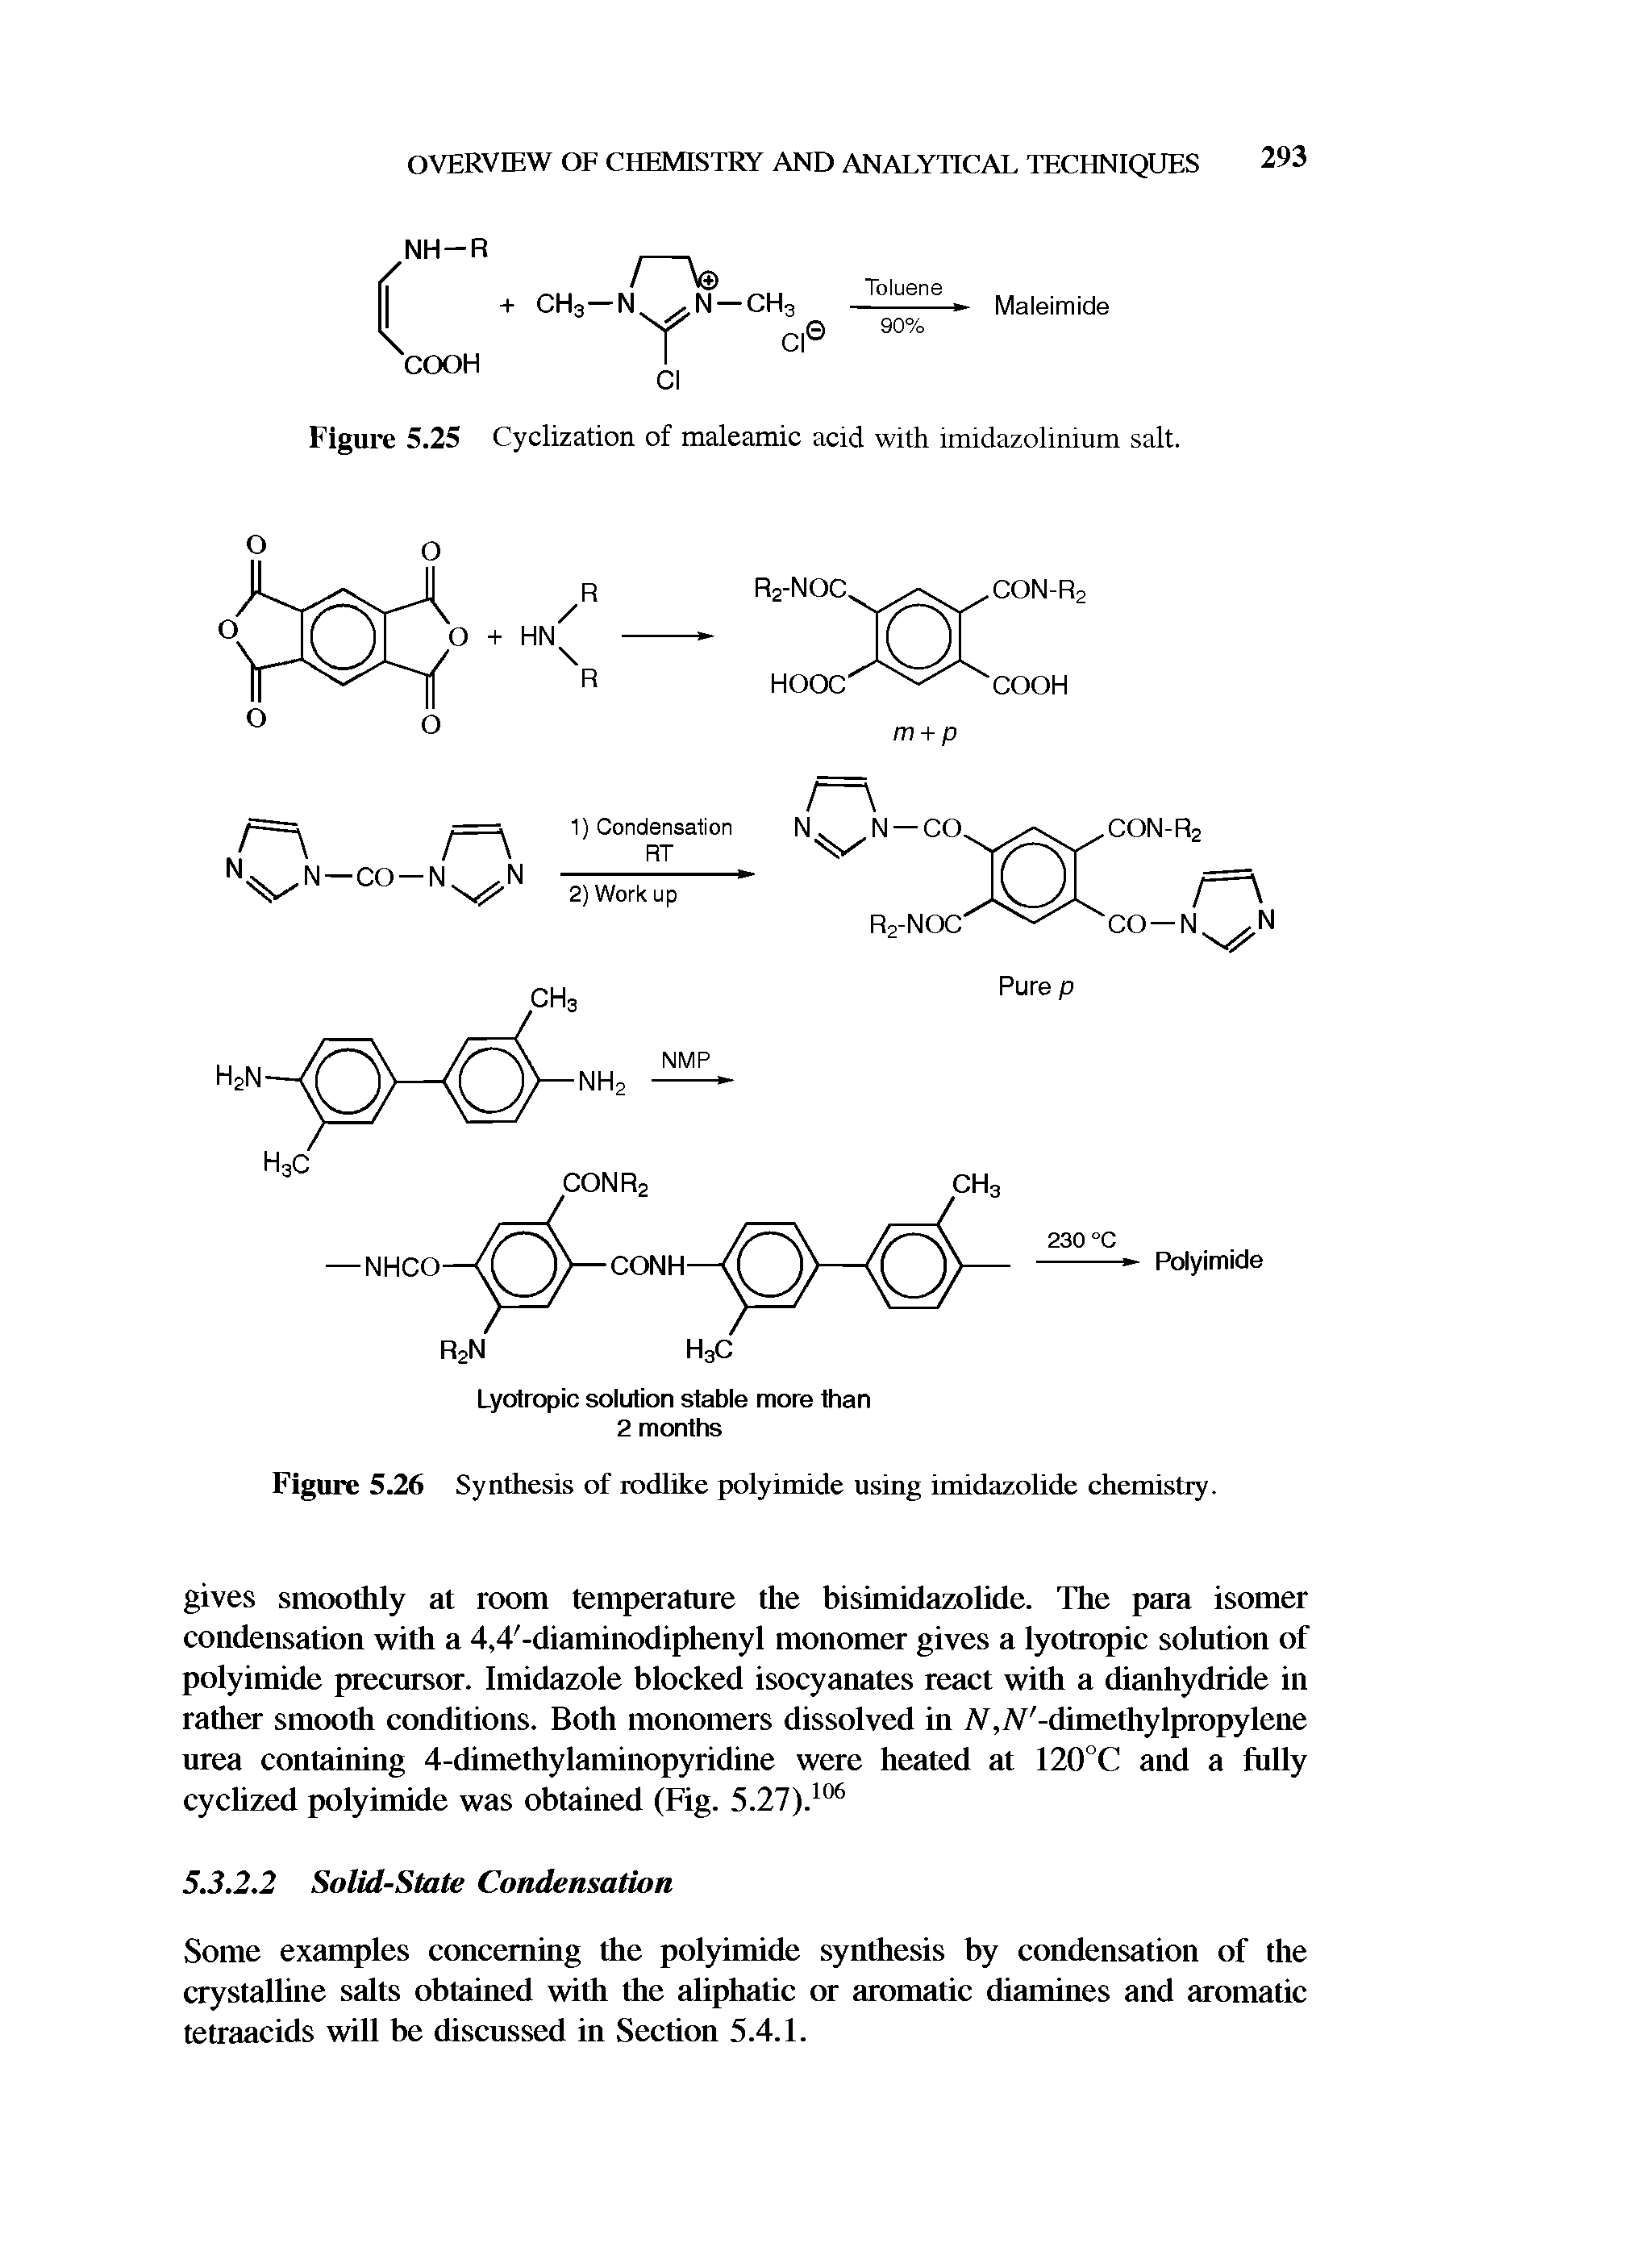 Figure 5.26 Synthesis of rodlike polyimide using imidazolide chemistry.